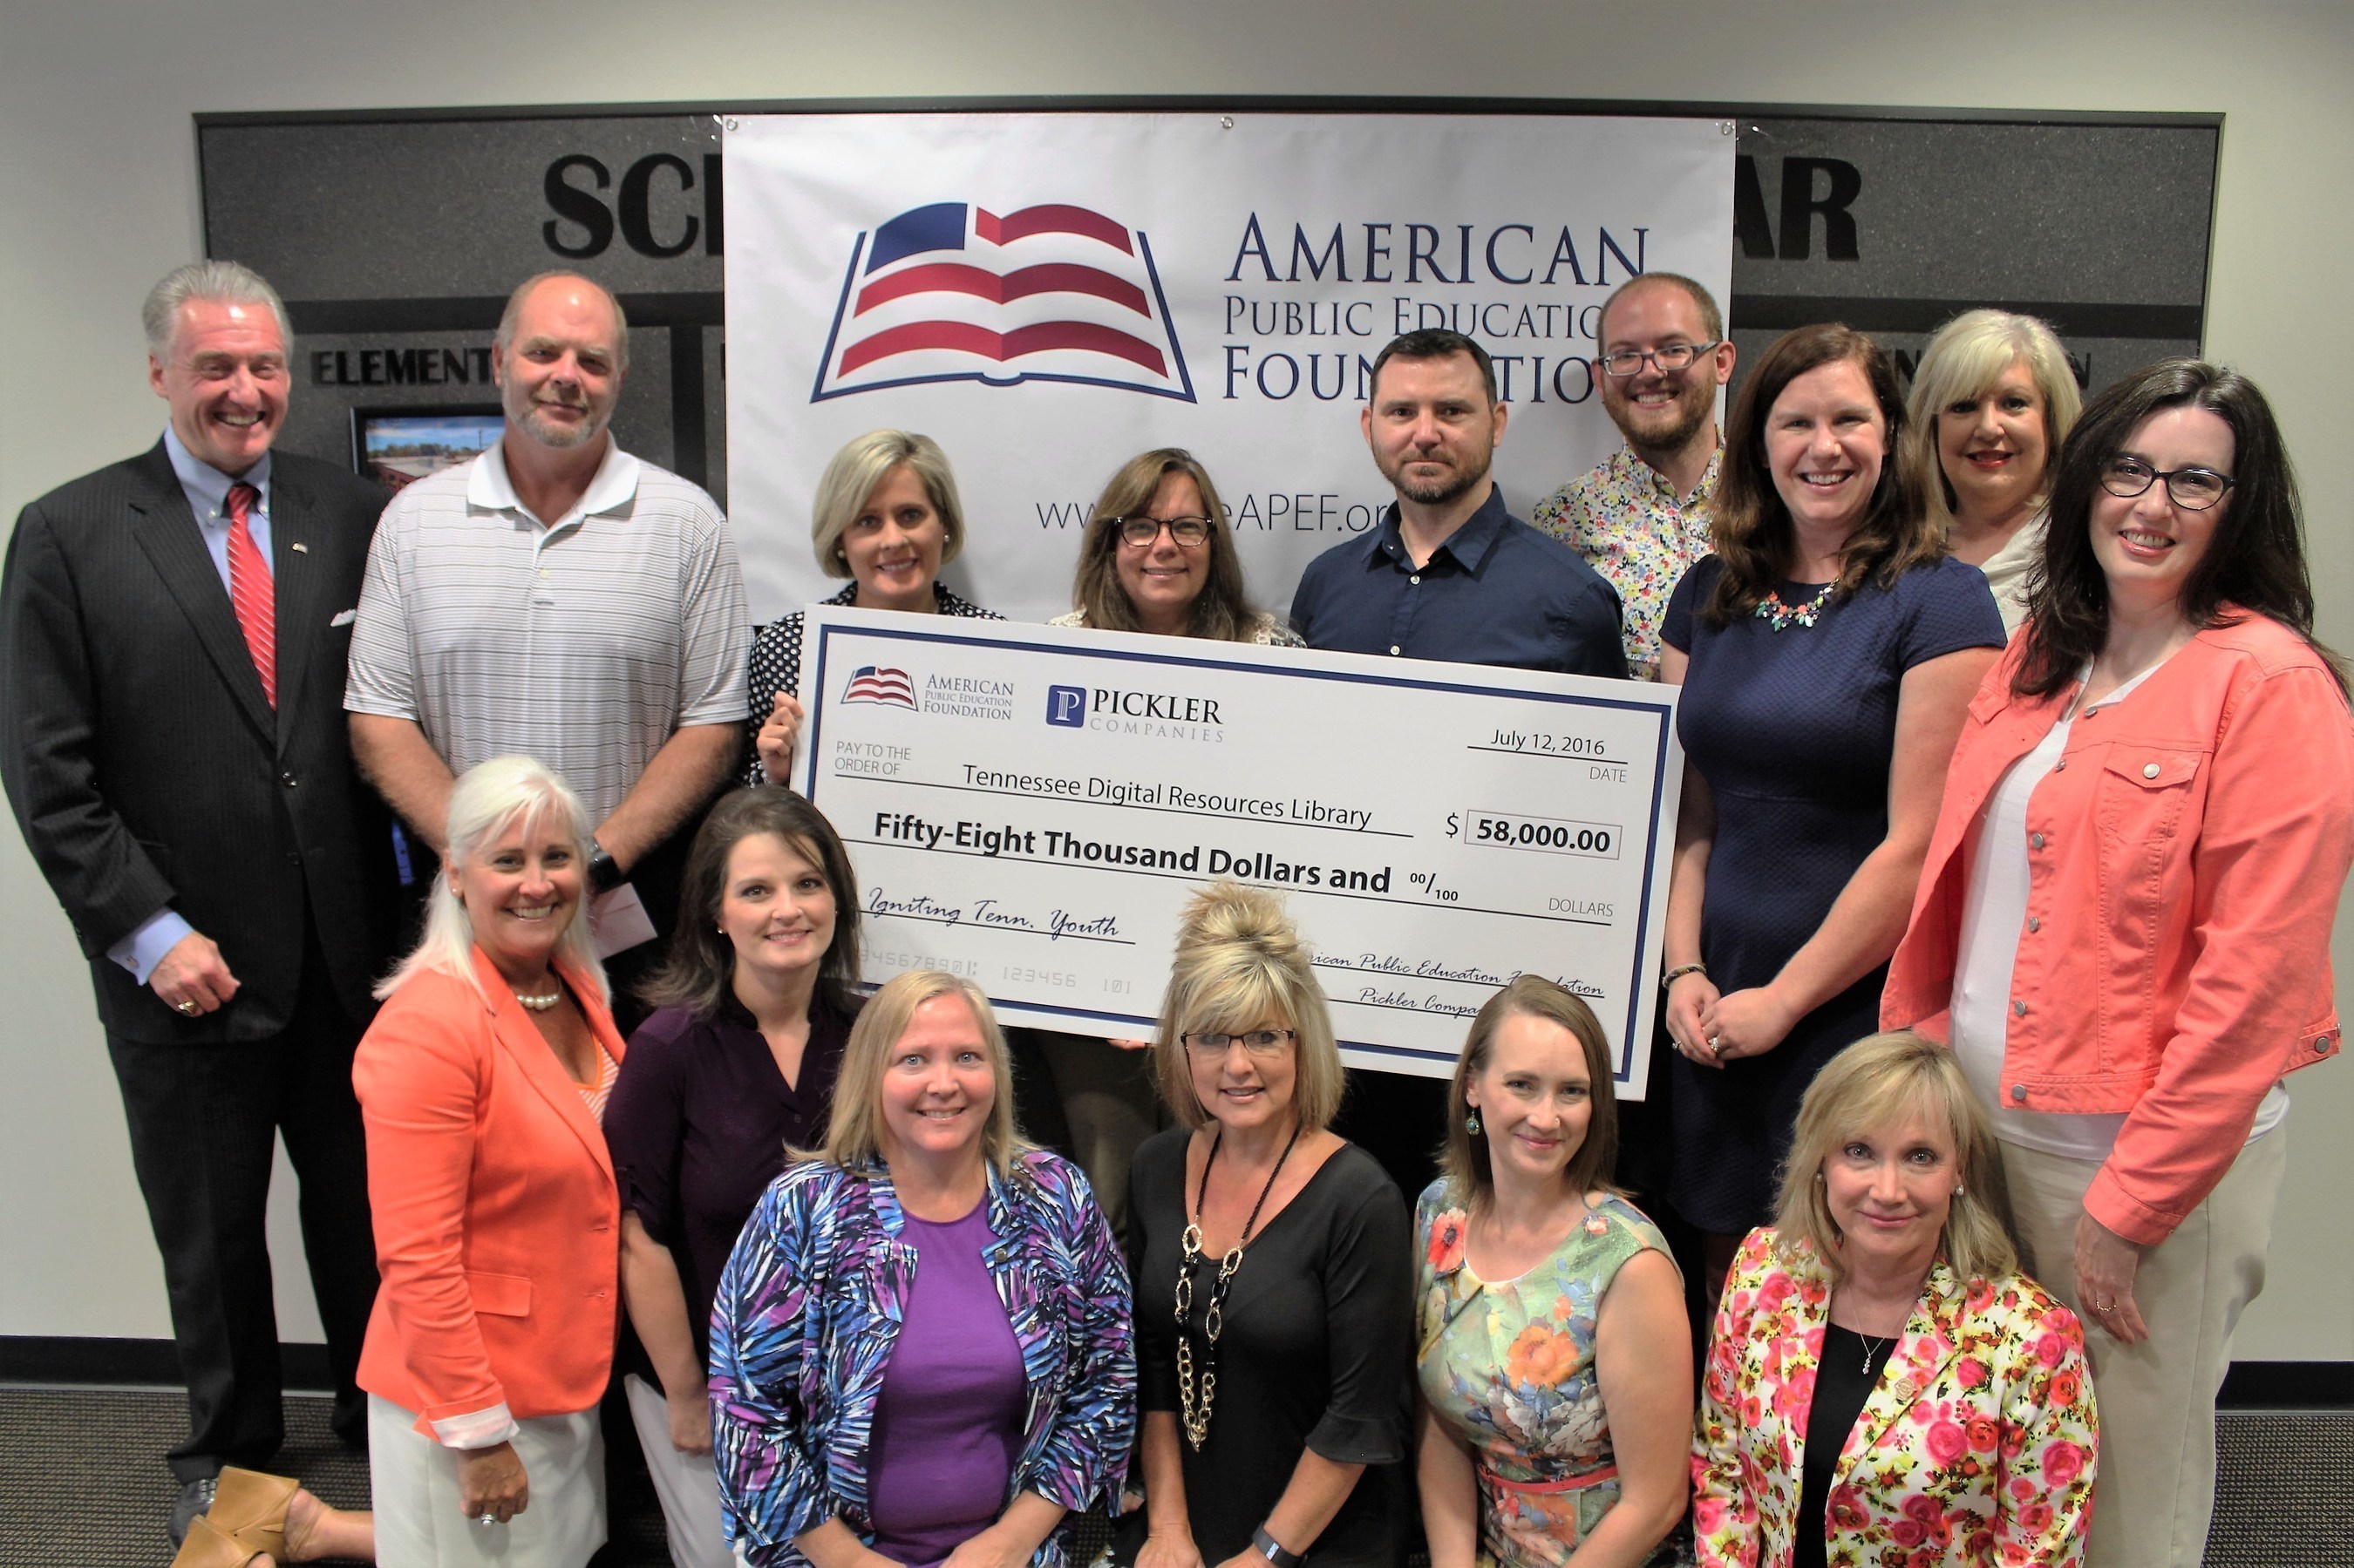 David Pickler, J.D., President, American Public Education Foundation (top left), presents a $58,000 check and iPad Air 2s to the 58 Tennessee high school teachers (partial group shown) who curated digital content for the Tennessee Digital Resources Library. Also shown (lower left) is Tammy Grissom, Ed.D., Executive Director, Tennessee School Boards Association.